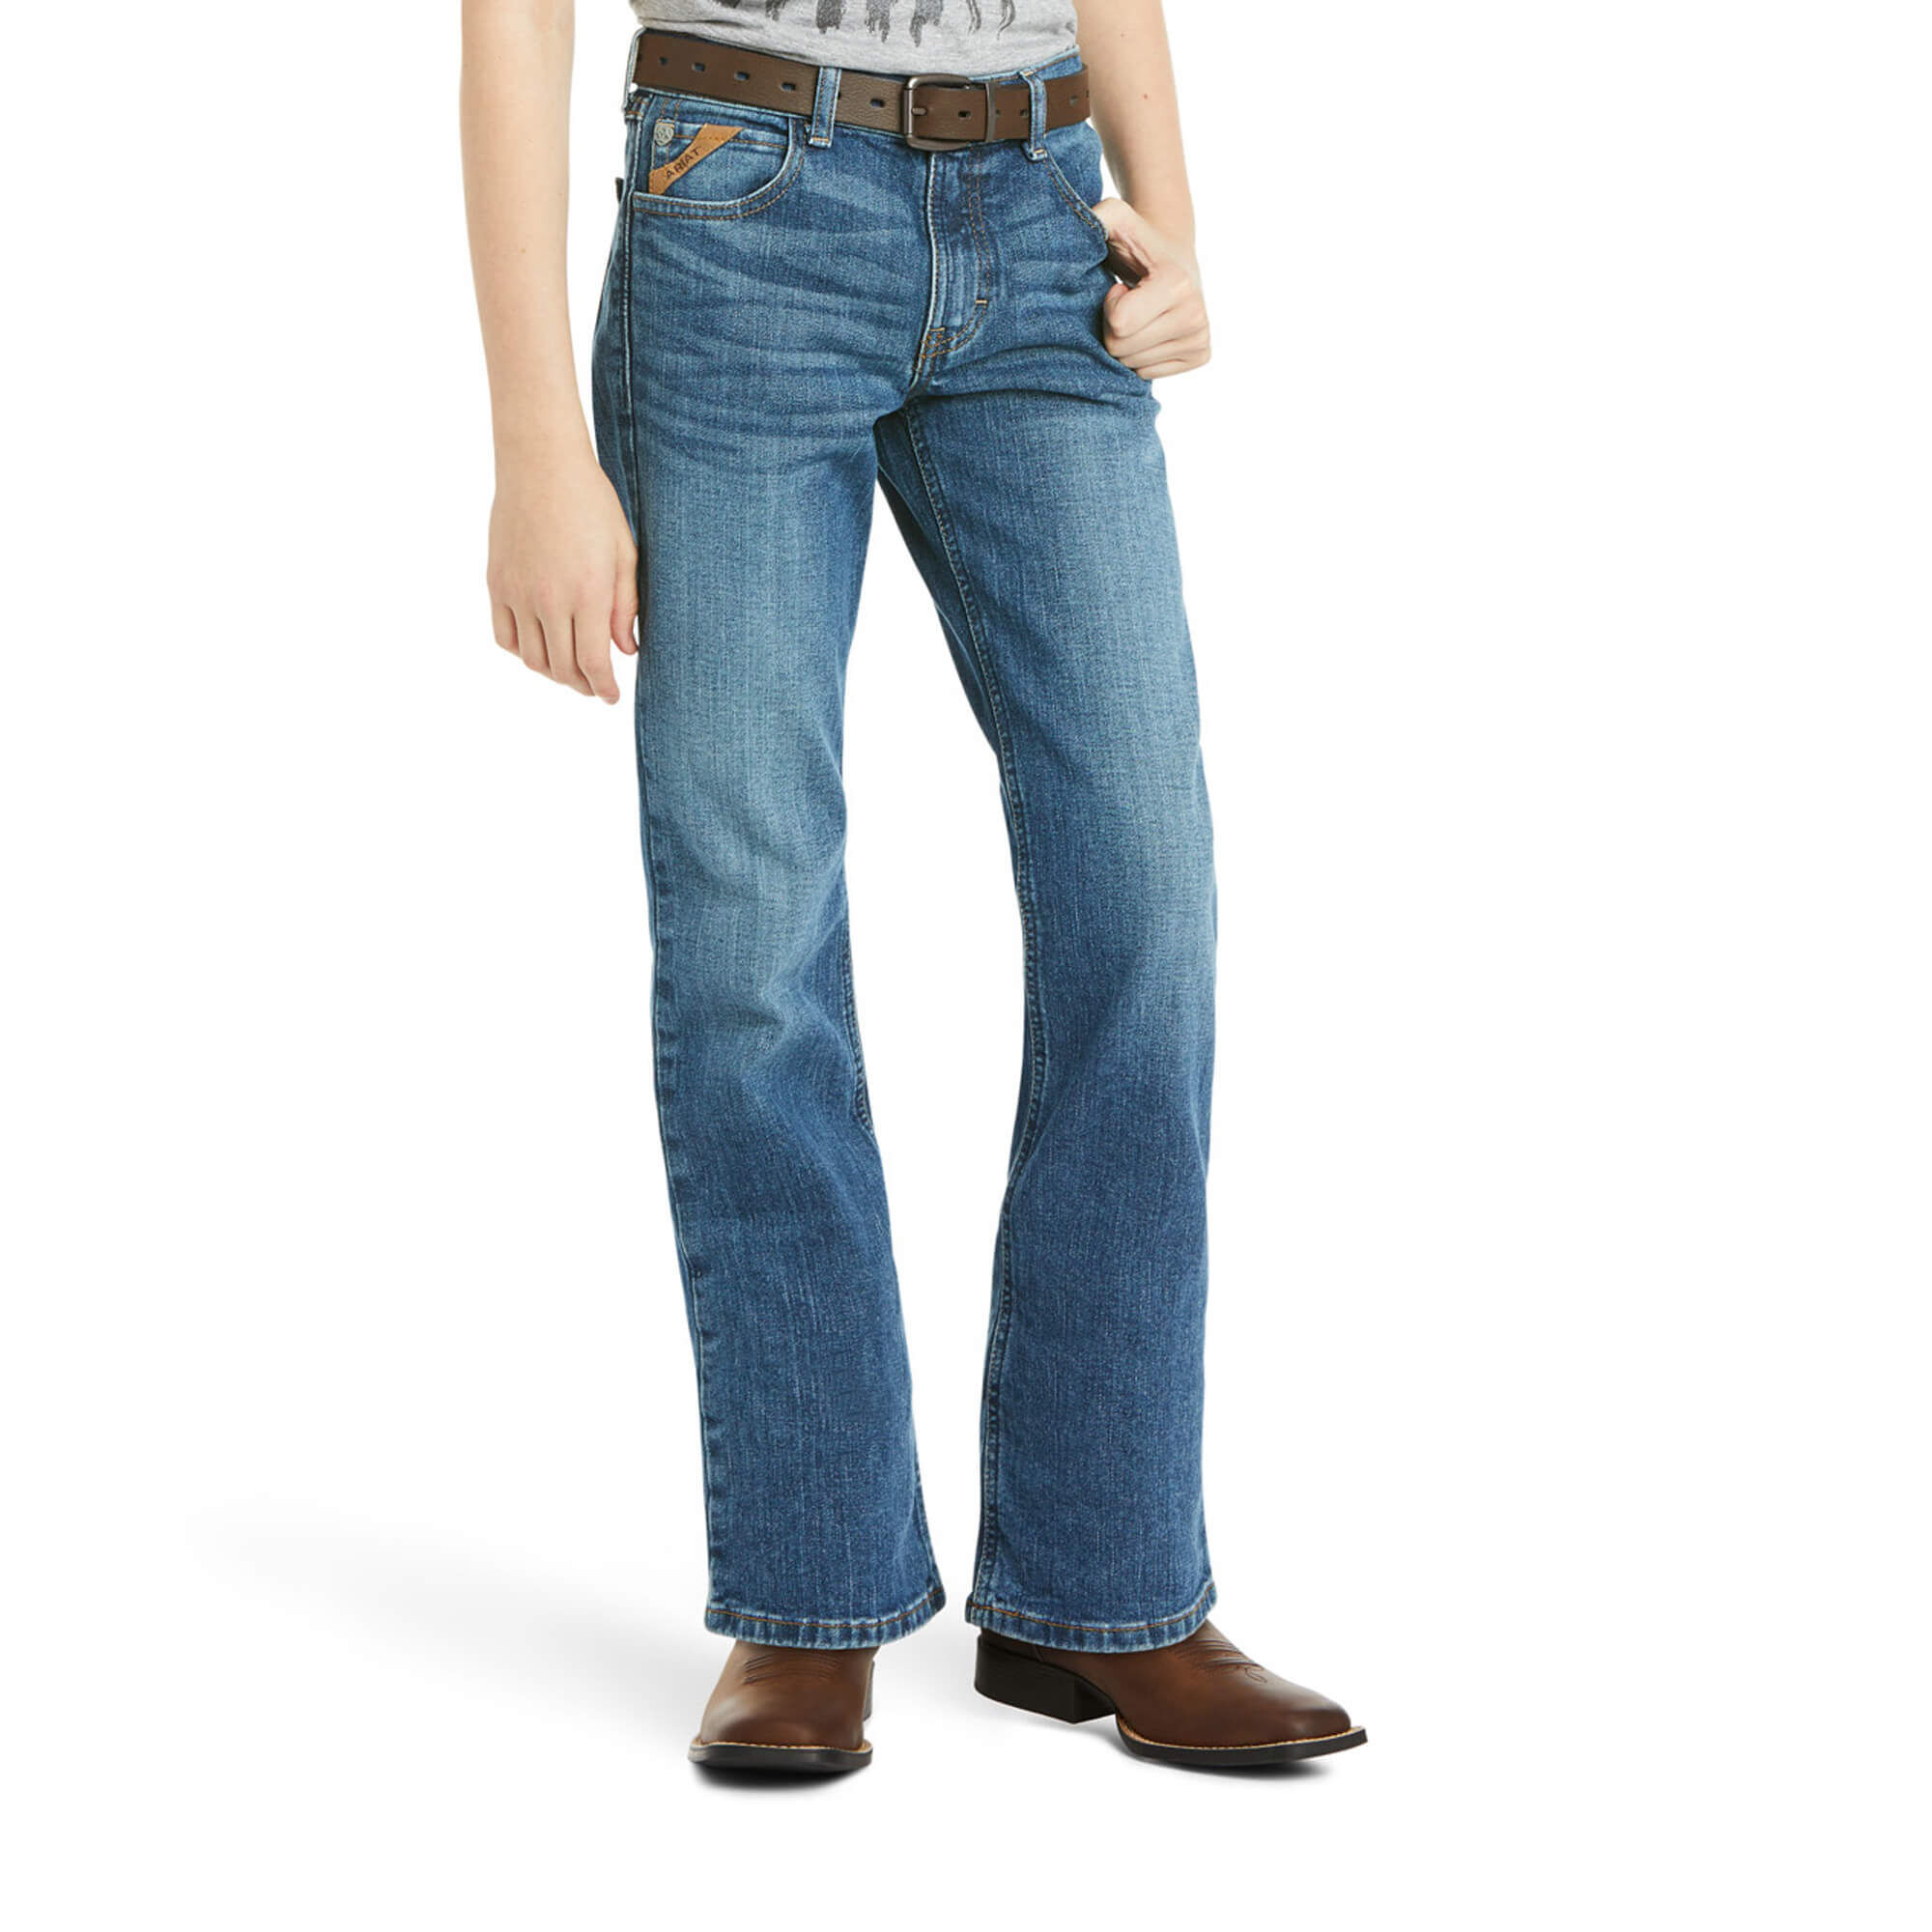 ariat jeans for kids